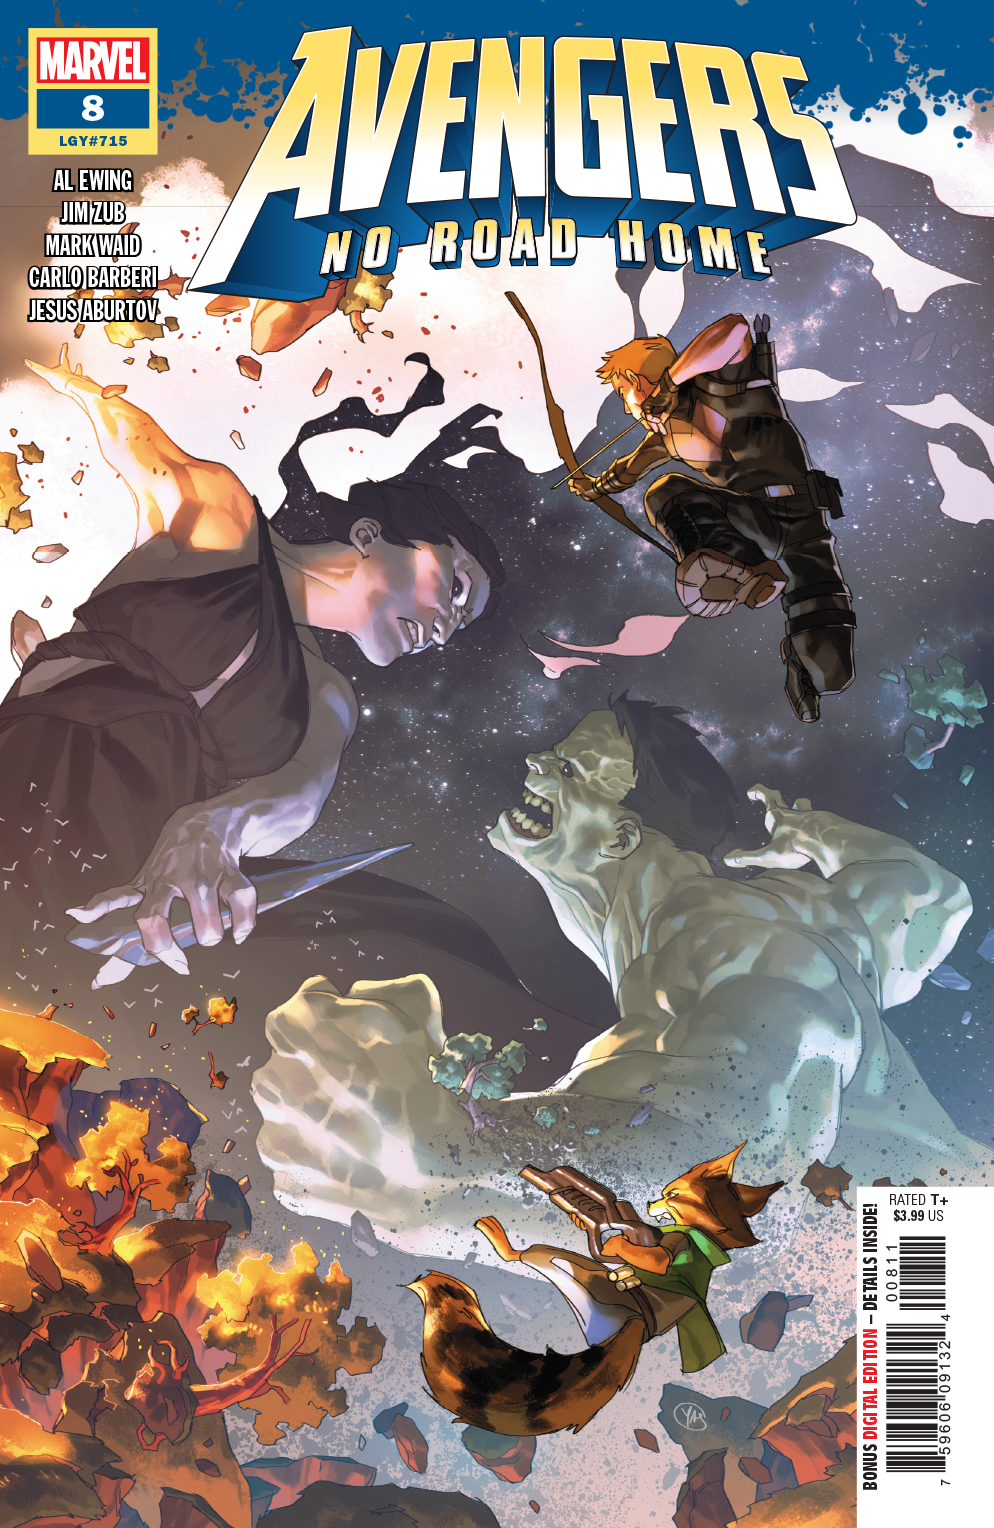 Avengers: No Road Home no. 8 (8 of 10) (2019 Series)